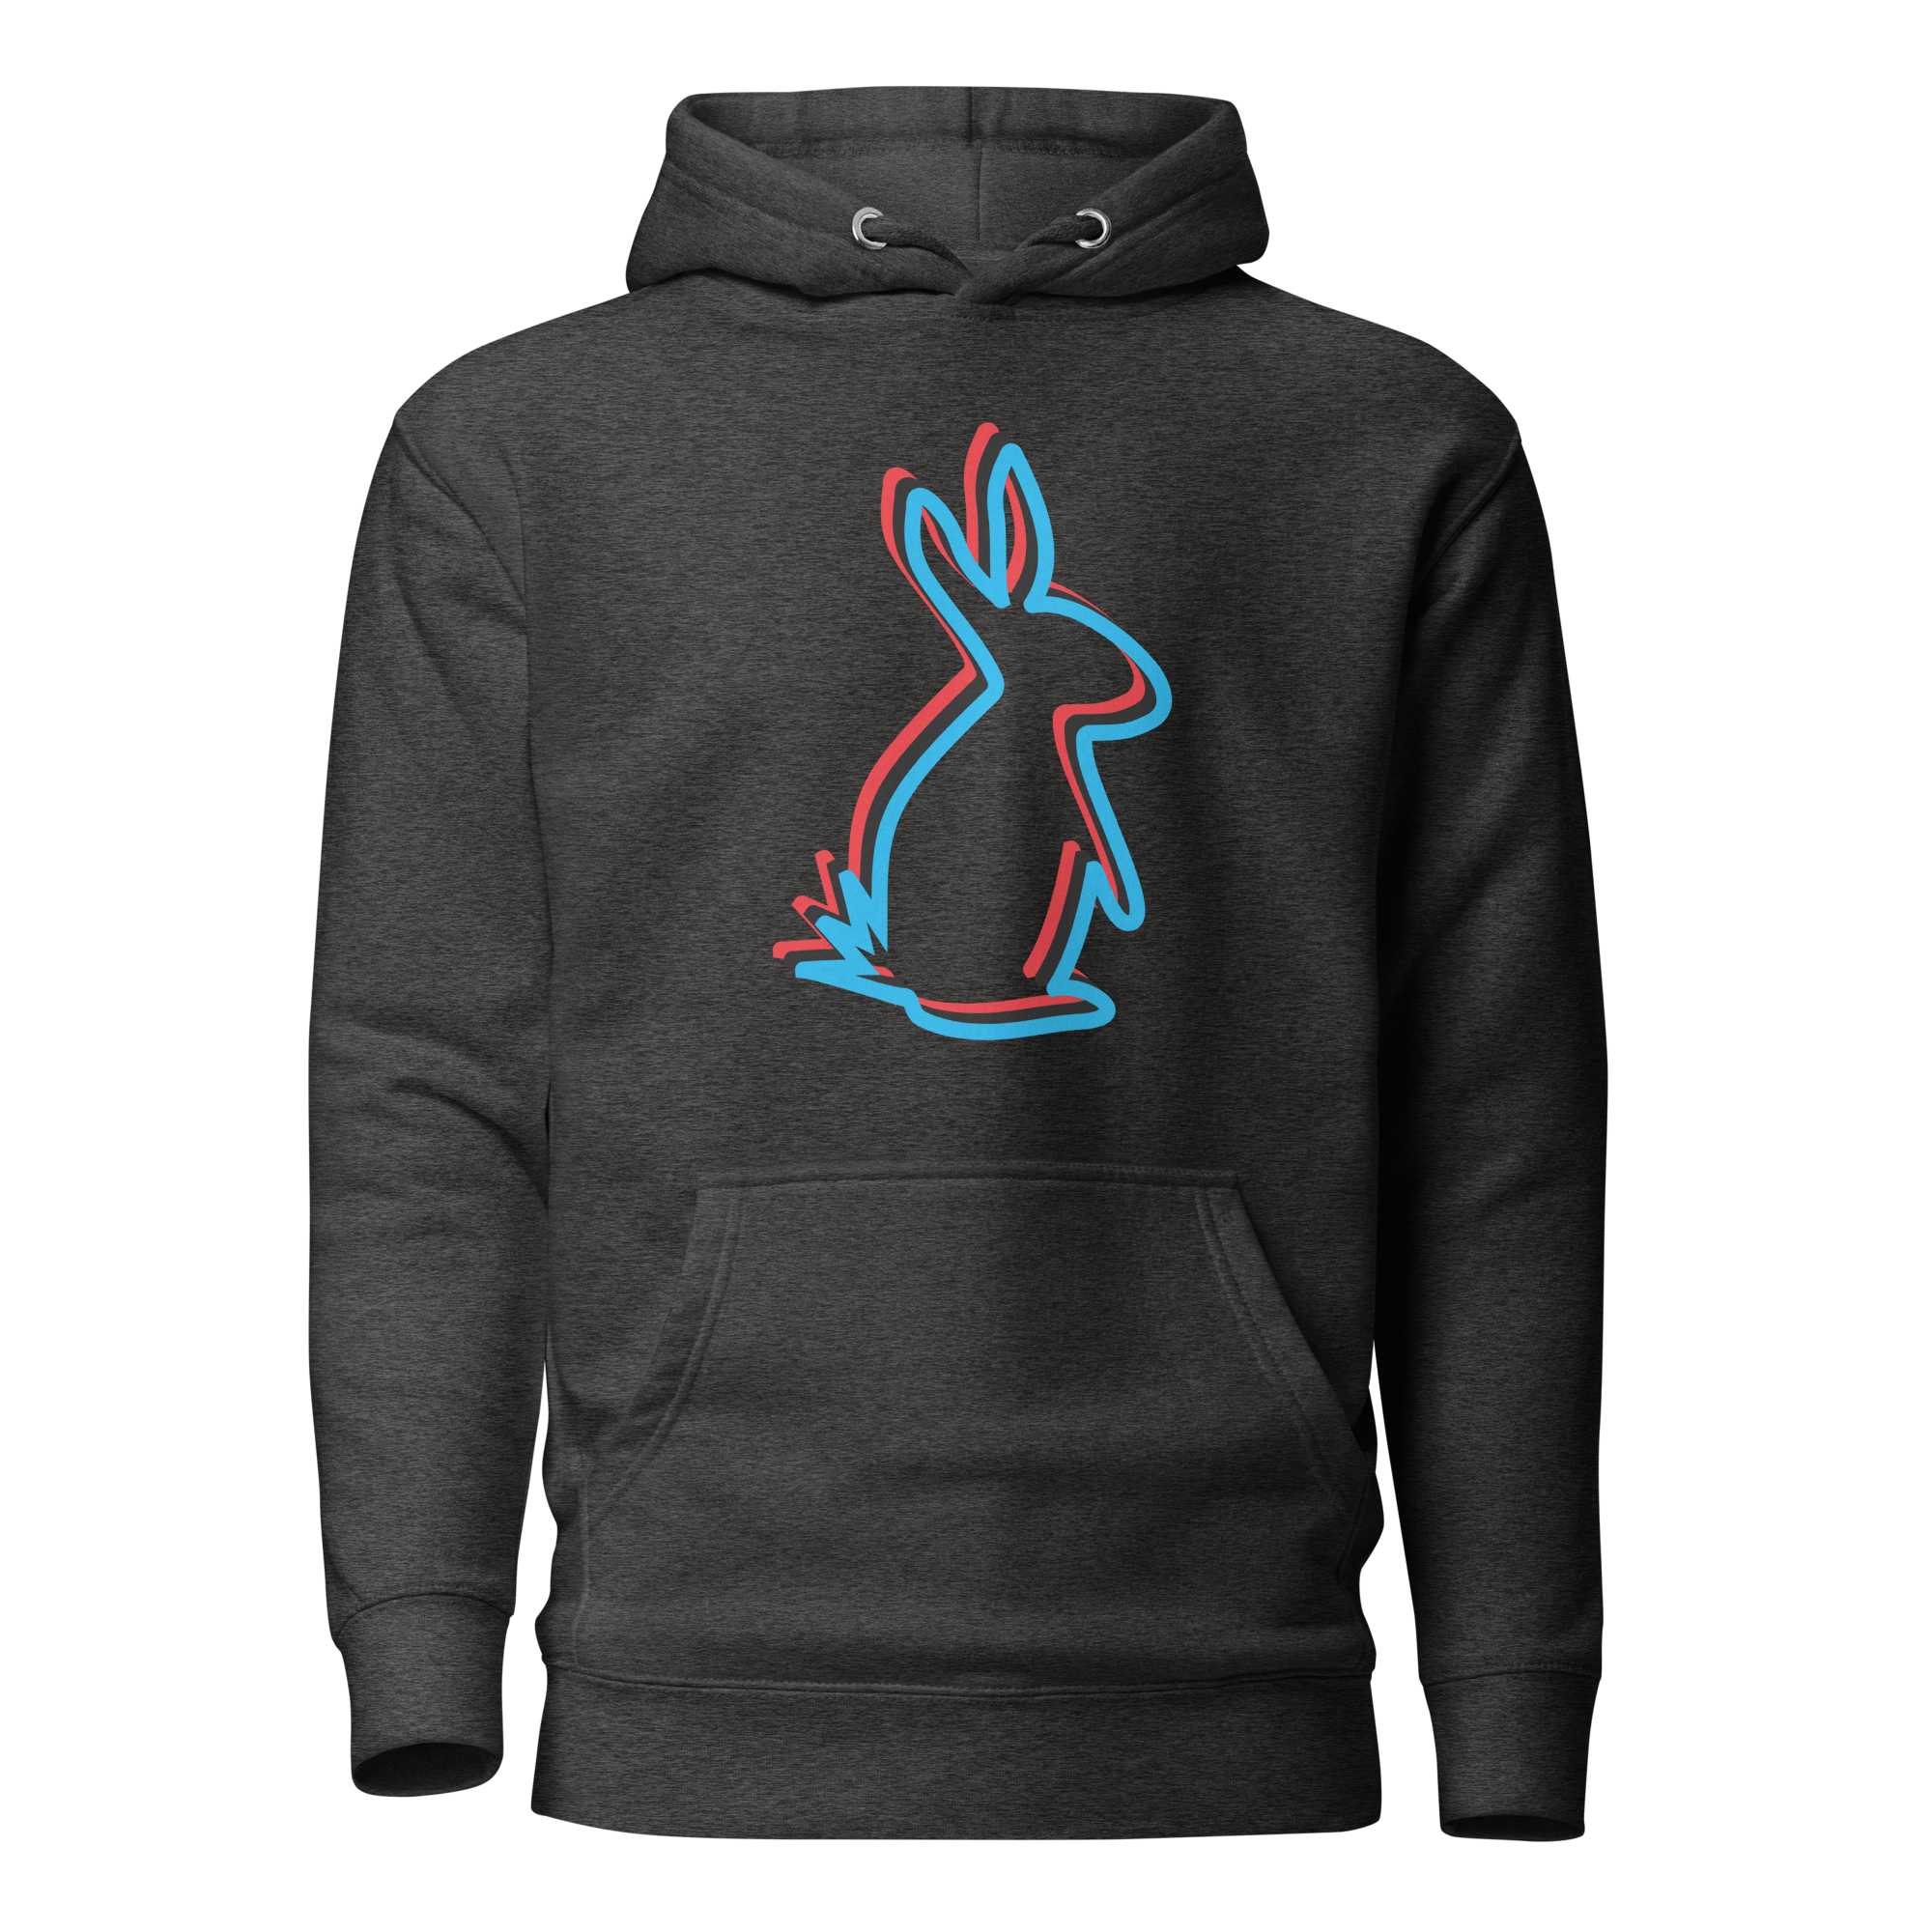 Charcoal Heather 3D Bunny Graphic Hoodie Front View